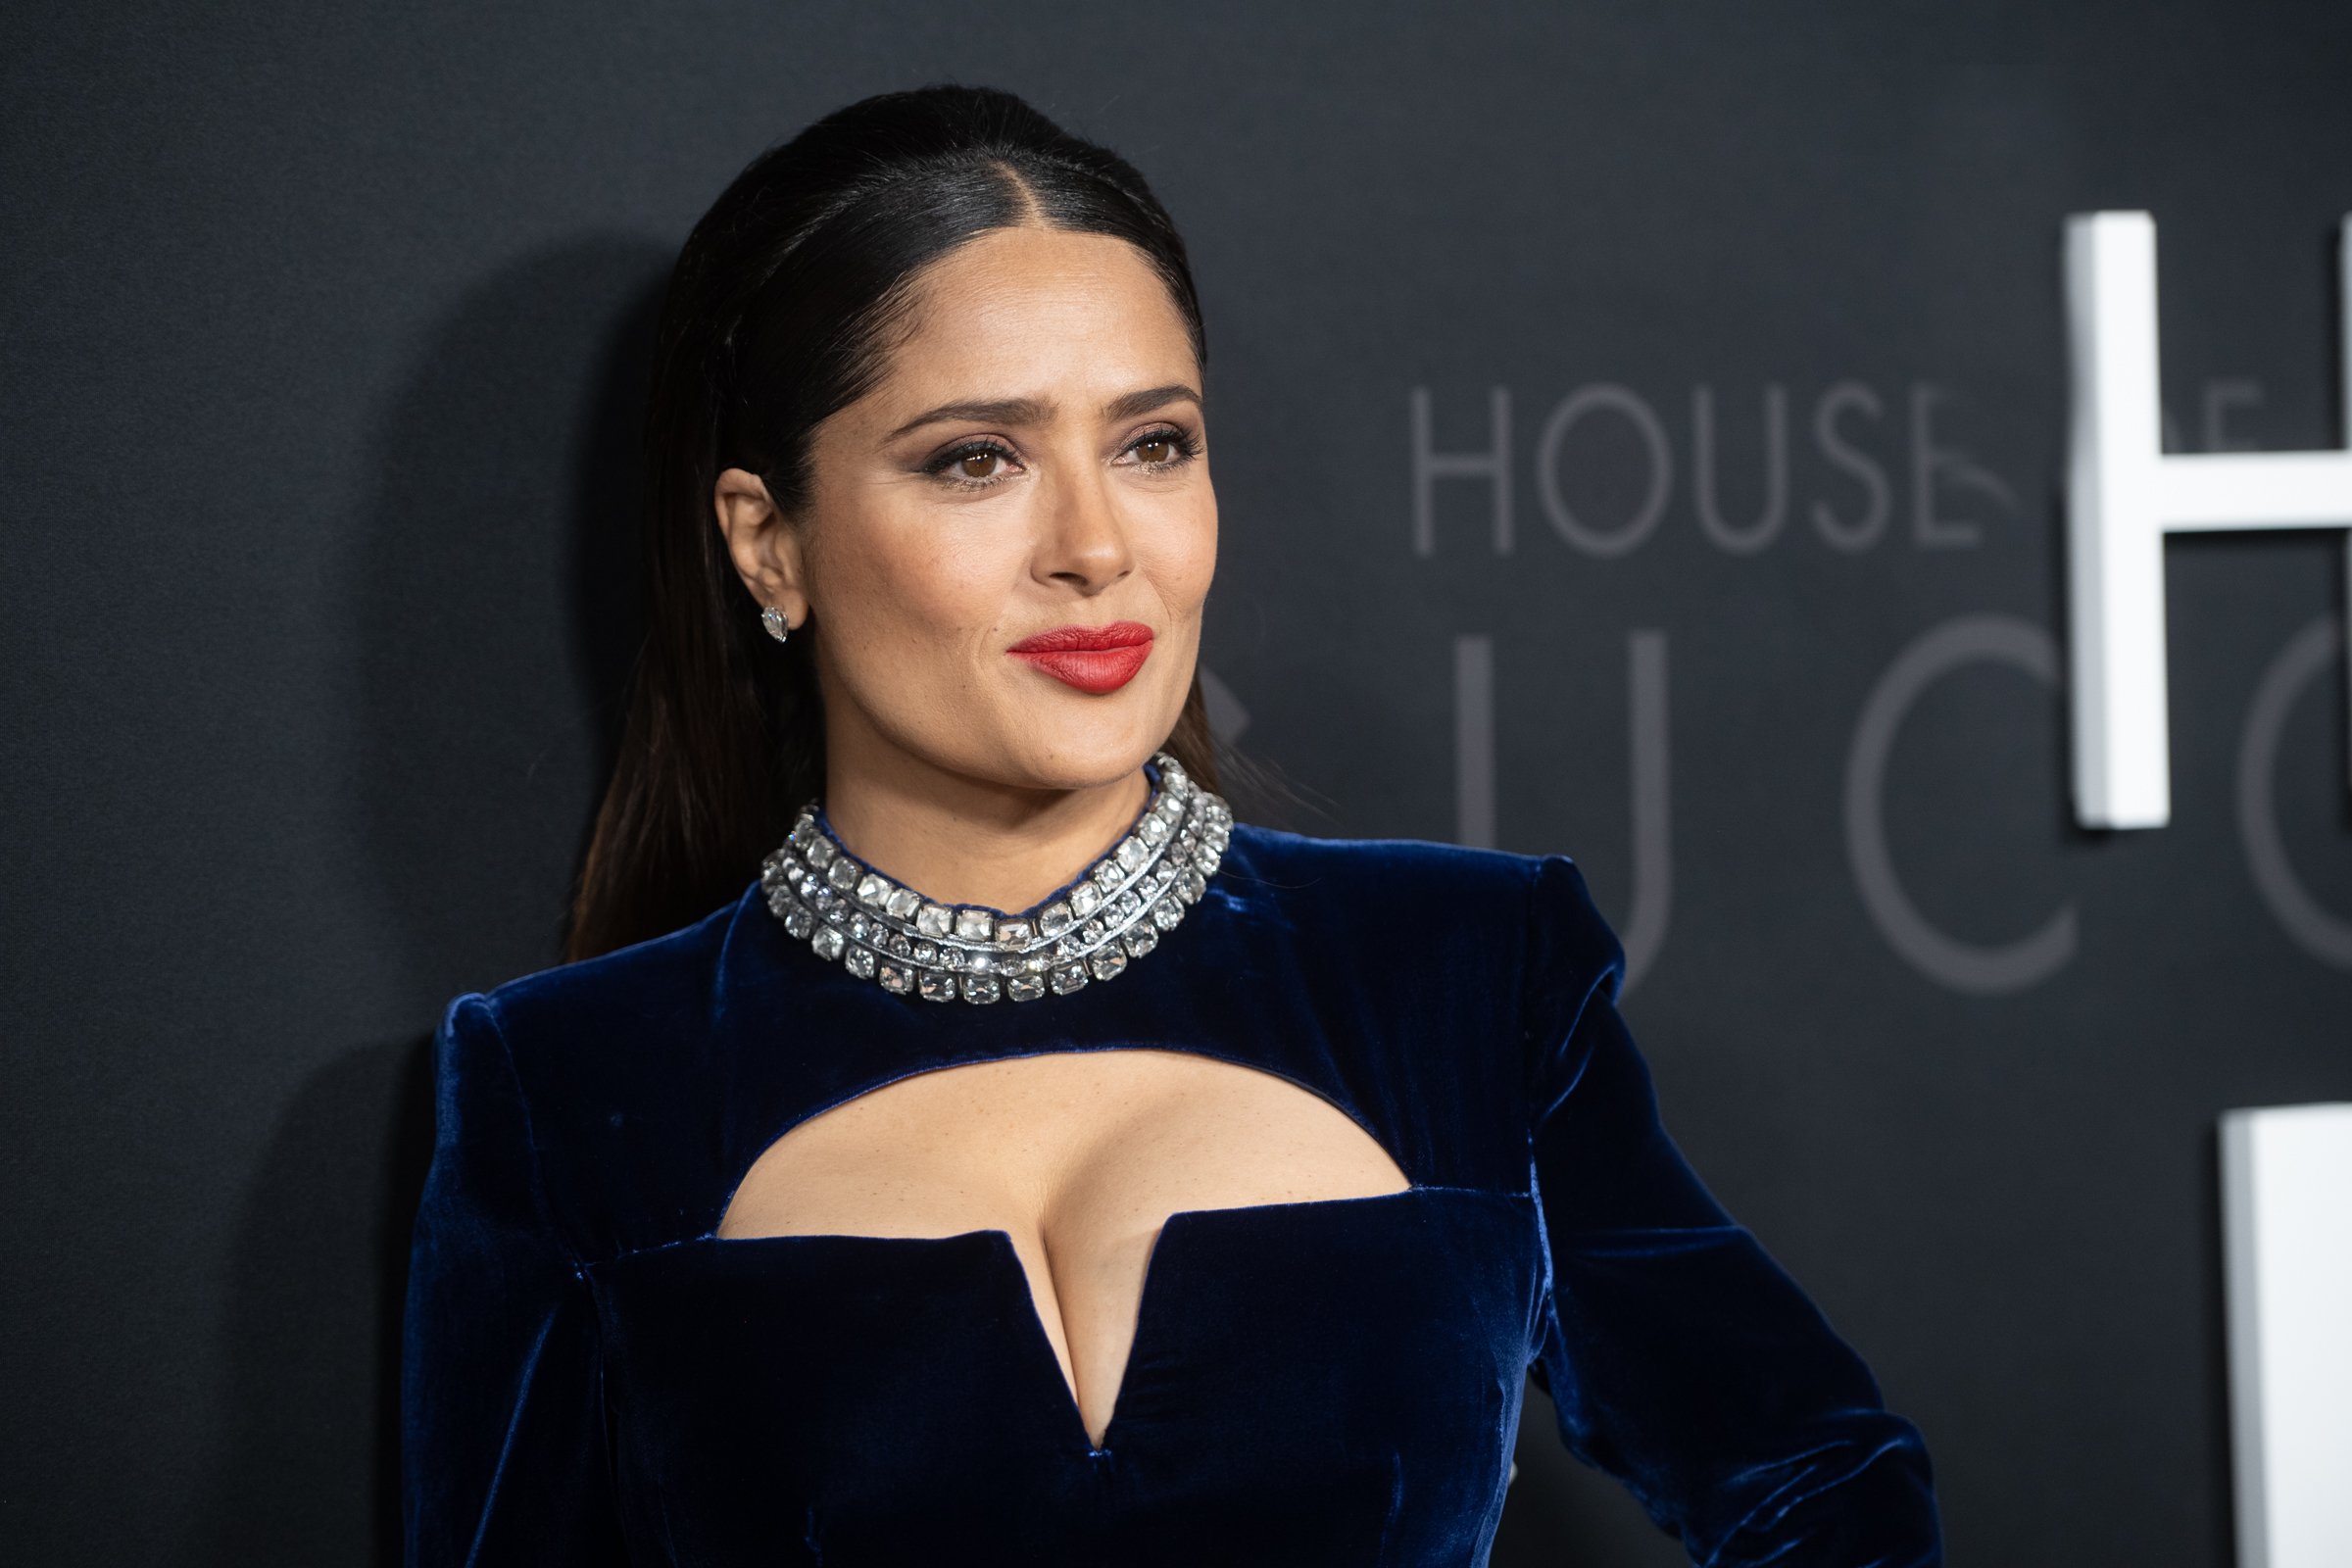 Salma Hayek attends the "House Of Gucci" New York Premiere at Jazz at Lincoln Center on November 16, 2021. | Photo: Getty Images